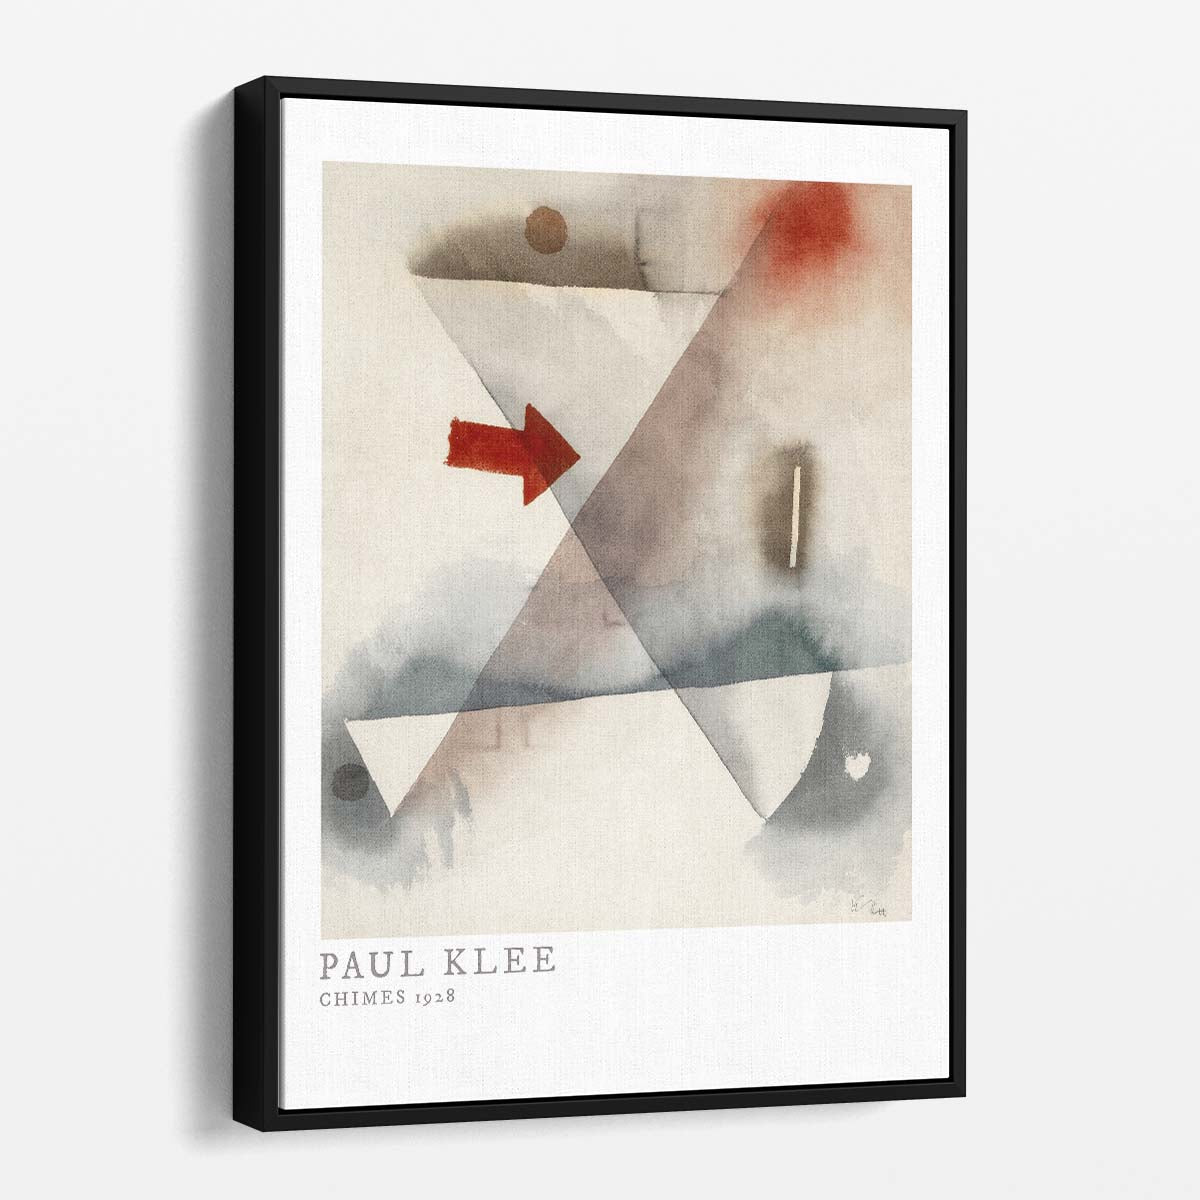 Paul Klee's 1928 Chimes Watercolor Illustration - Abstract Modern Masterpiece by Luxuriance Designs, made in USA